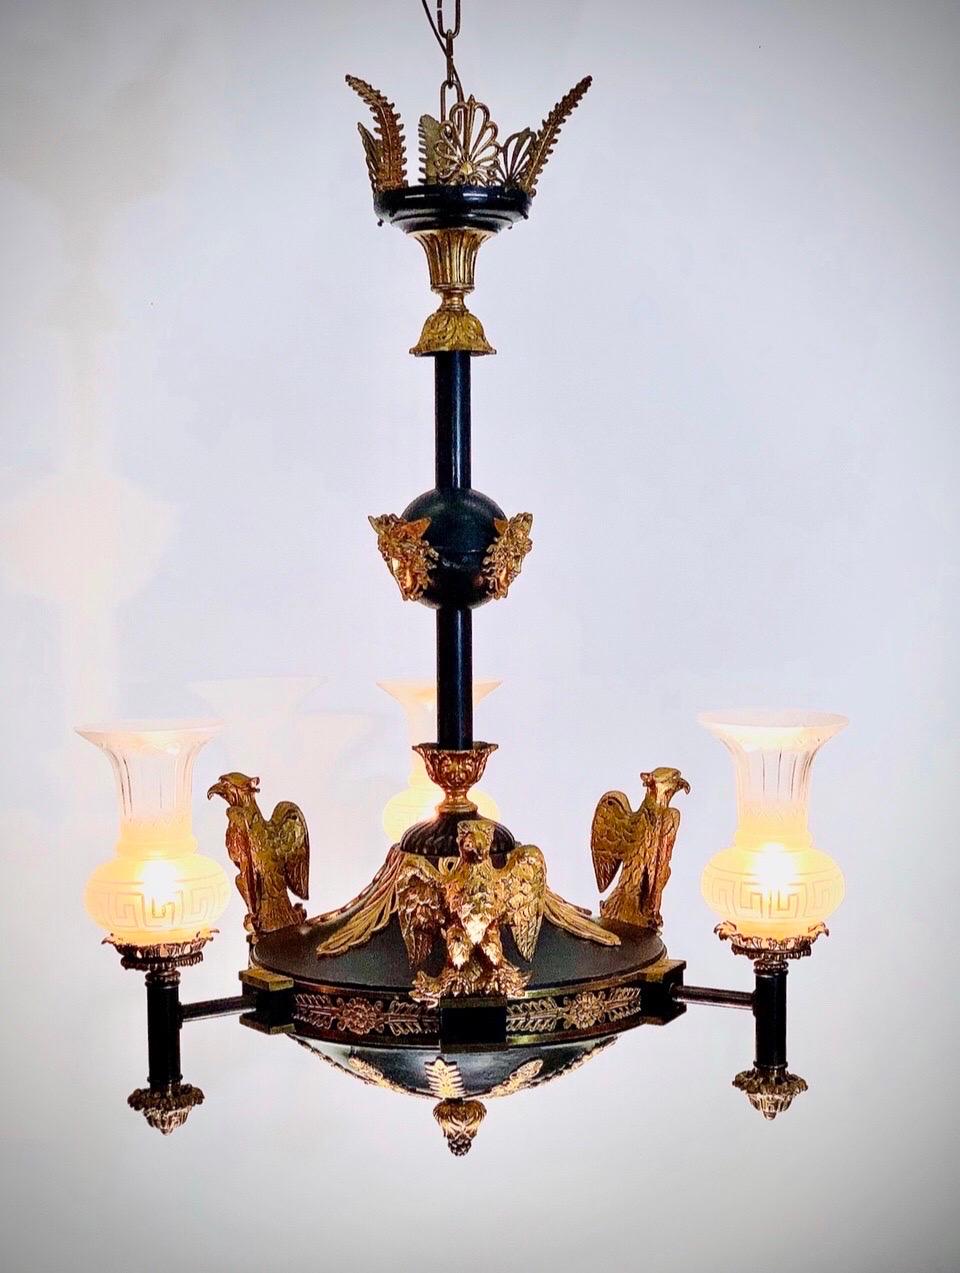 This Magnificent 19th century French Empire Eagle Mounted Bronze Gasolier / Chandelier has three Torch decorated lights with Greek Key Trump Shades. This Grand Imperial Chandelier / Gasolier has an elegant two tone Patinated Bronze and Ormolu finish